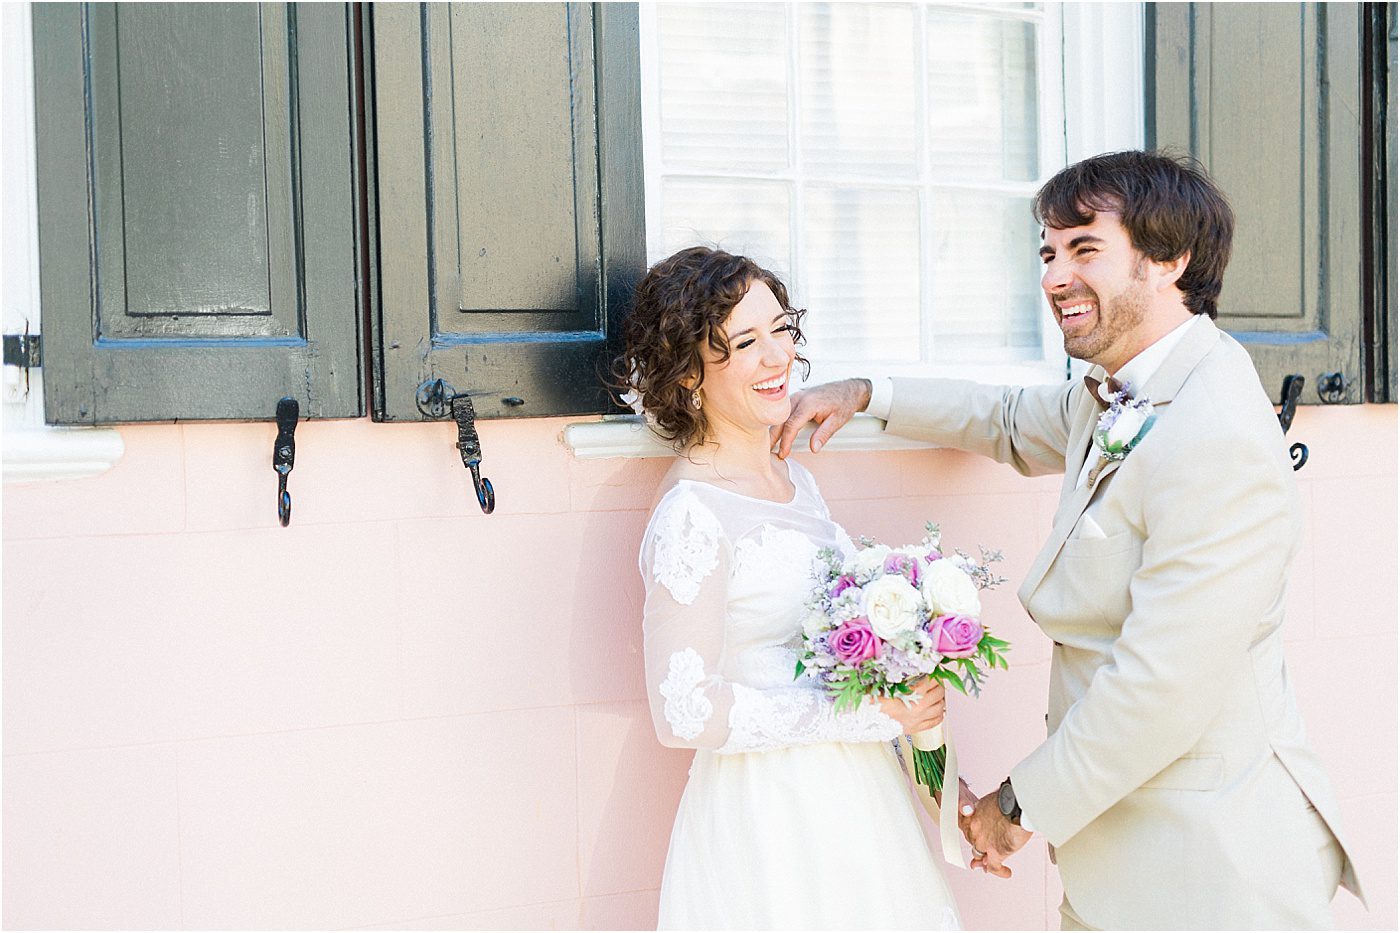 Colorful Magnolia Plantation Wedding by Catherine Ann Photography and Pinnacle Events